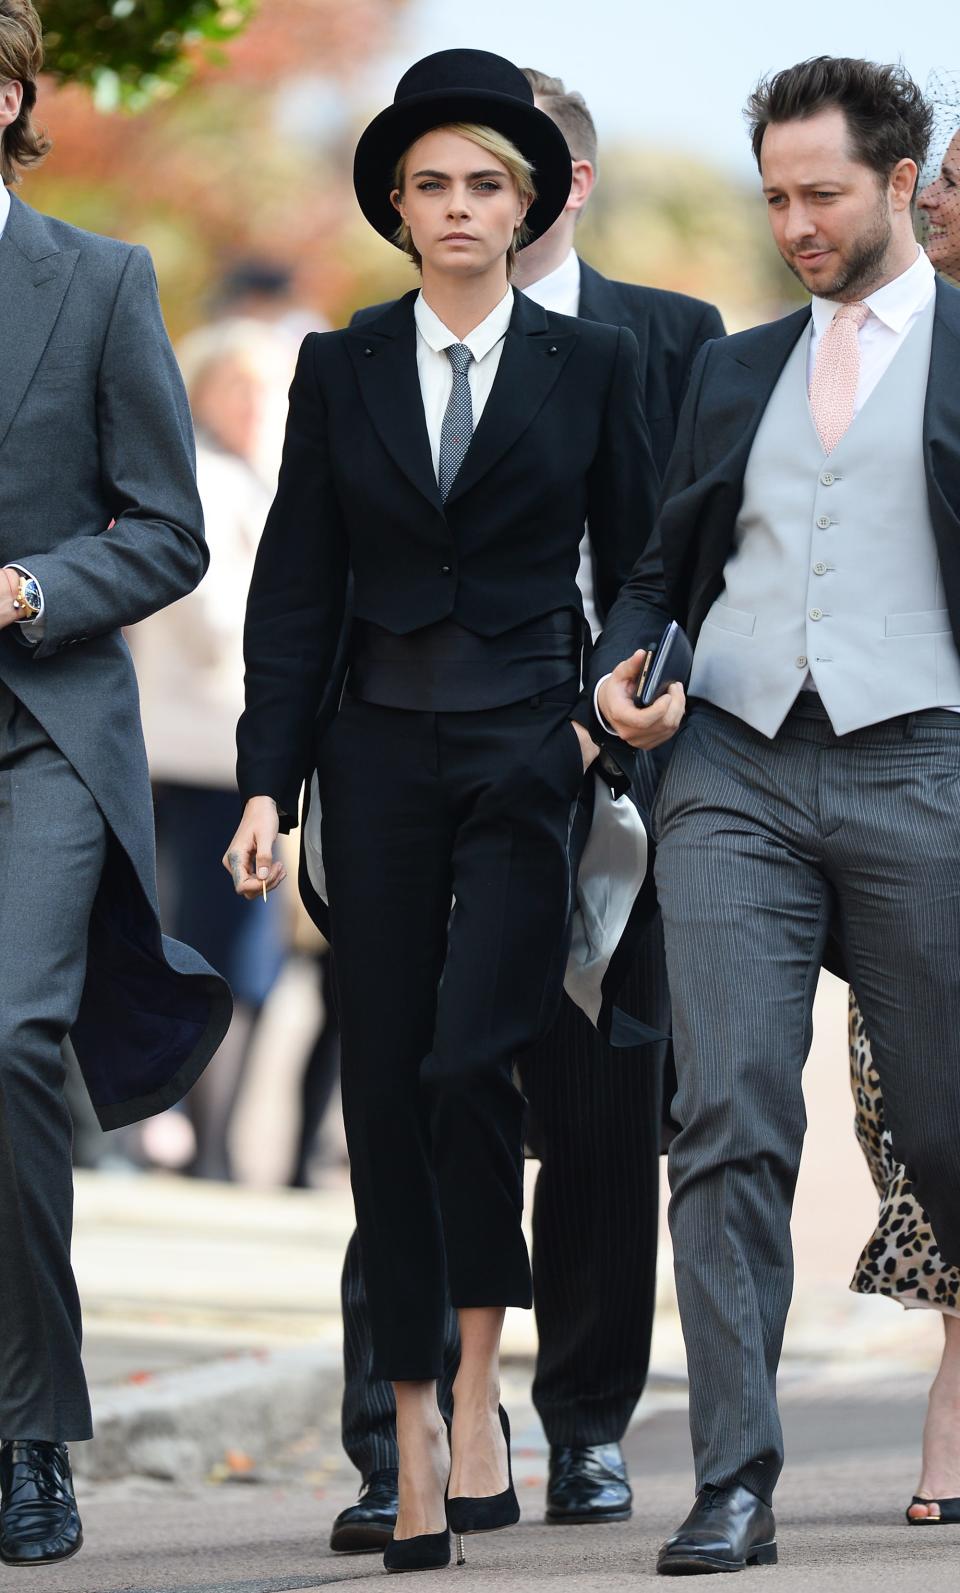 Cara Delevigne walks in a suit and top hat.